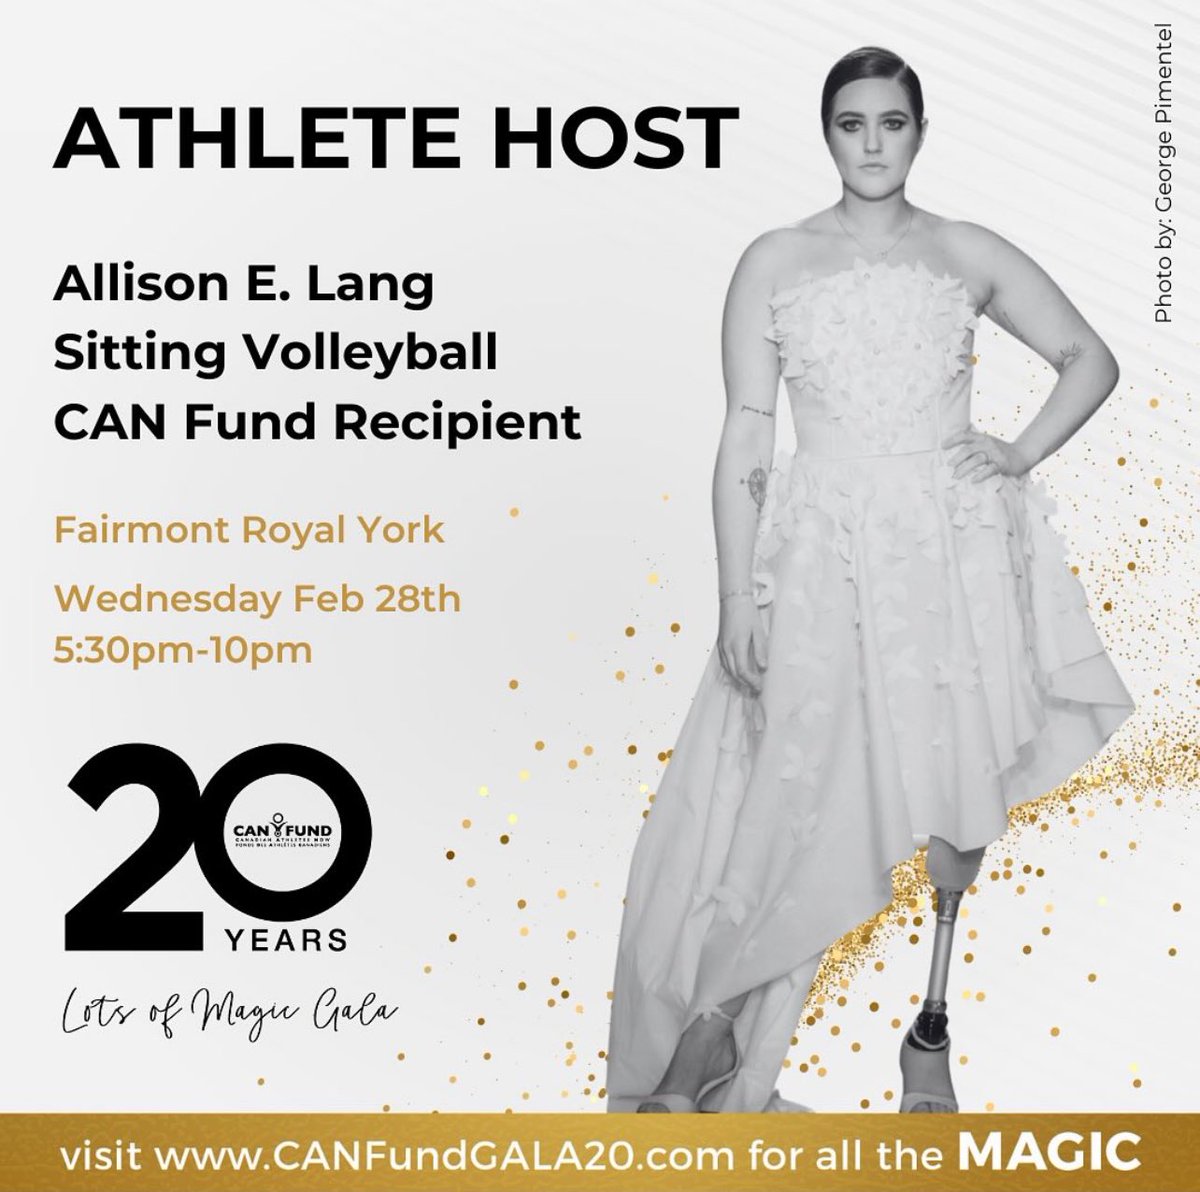 Come celebrate the 20th anniversary of @CANFUND on Wednesday, Feb 28th in Toronto! They’ve been helping make dreams achieveable for the best athletic talent in Canada since 2003! I will be there as an athlete host 😄 It’s a night you won’t want to miss! See you there ♥️